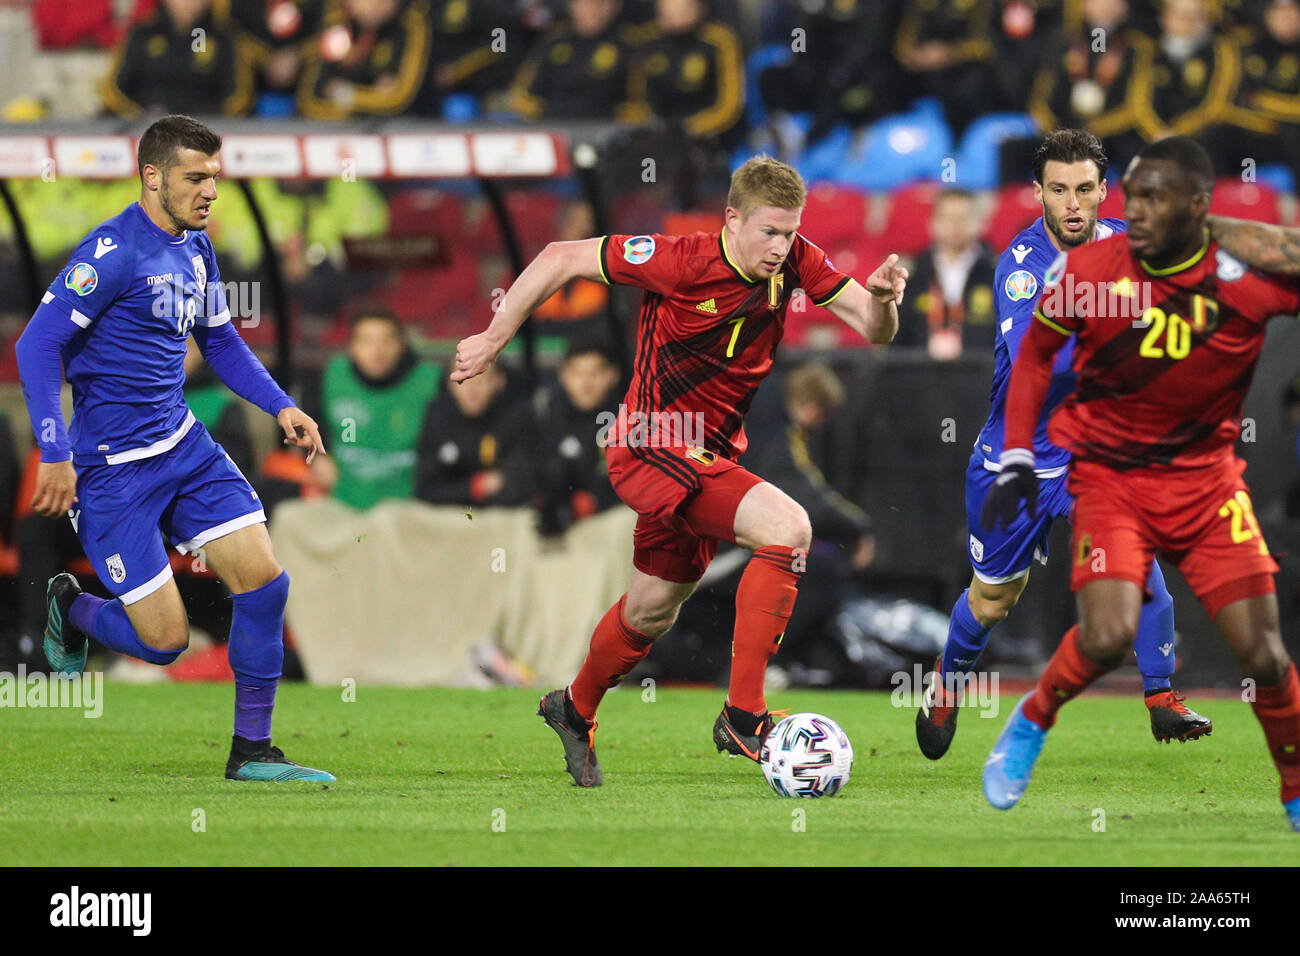 Brussels, Belgium. 19th Nov, 2019. Kevin De Bruyne (2nd L) of Belgium competes during a UEFA Euro 2020 group I qualifying match between Belgium and Cyprus in Brussels, Belgium, Nov. 19, 2019. Credit: Zheng Huansong/Xinhua/Alamy Live News Stock Photo